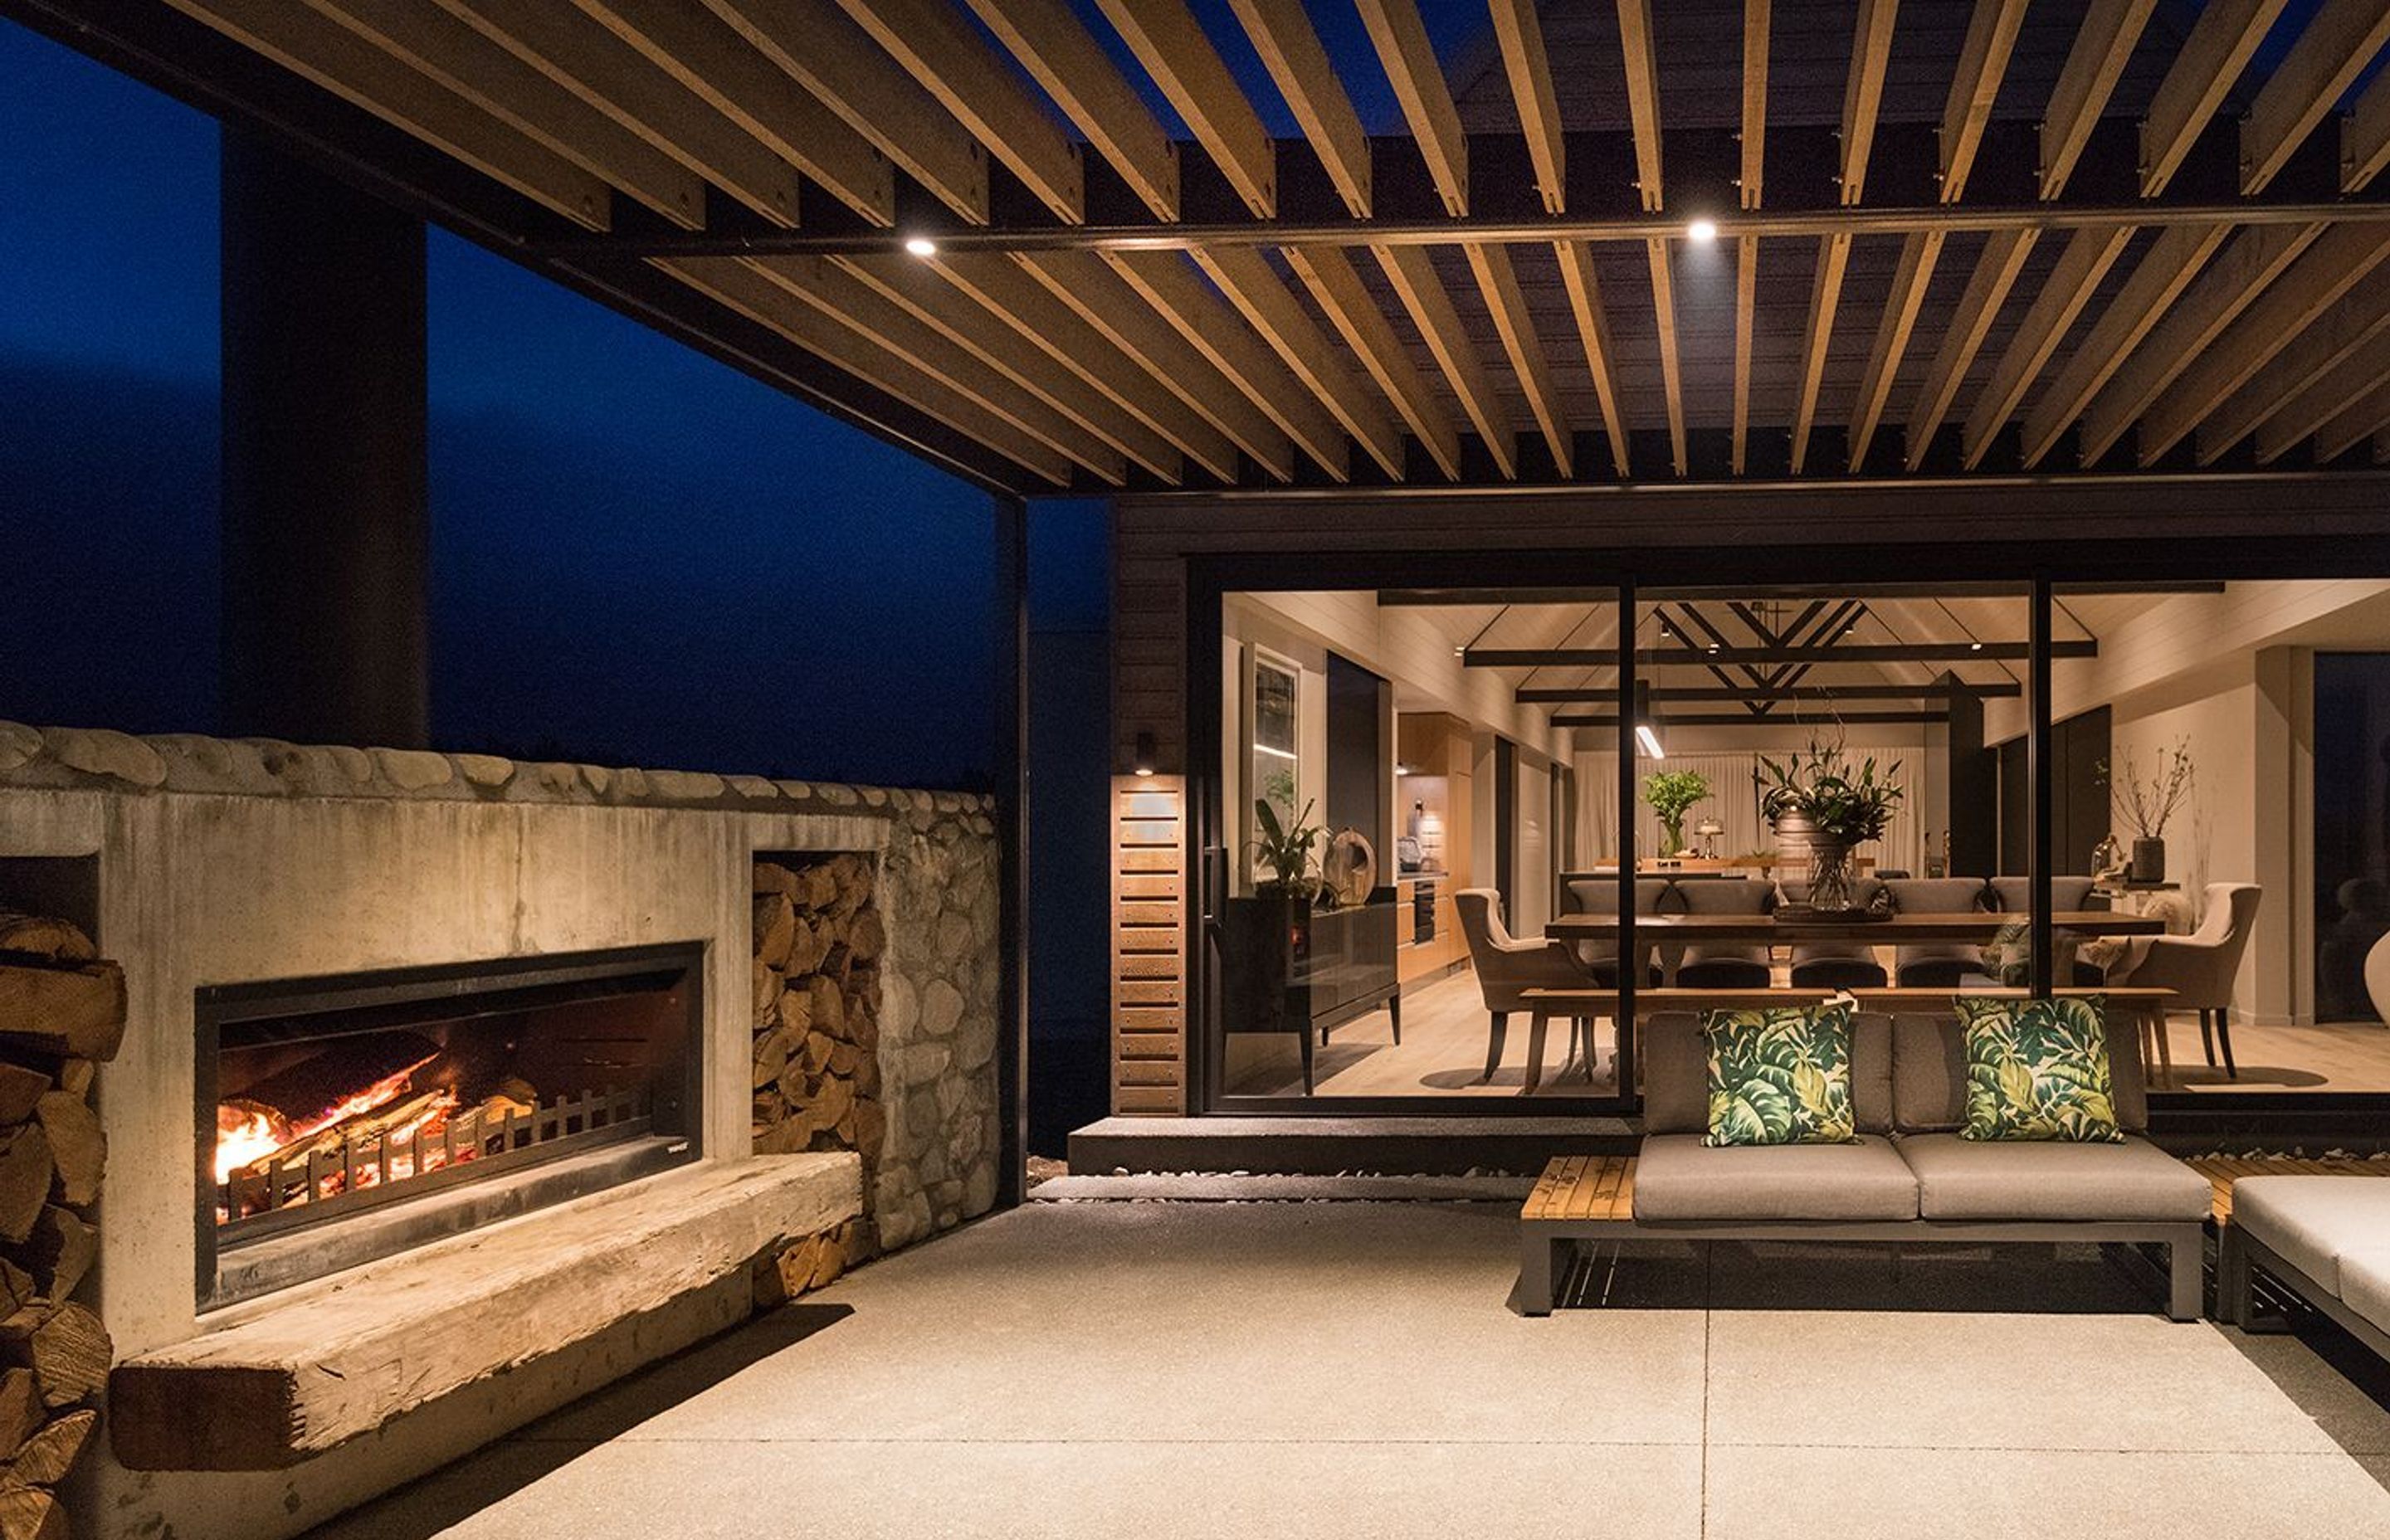 Outdoor area with stunning fireplace